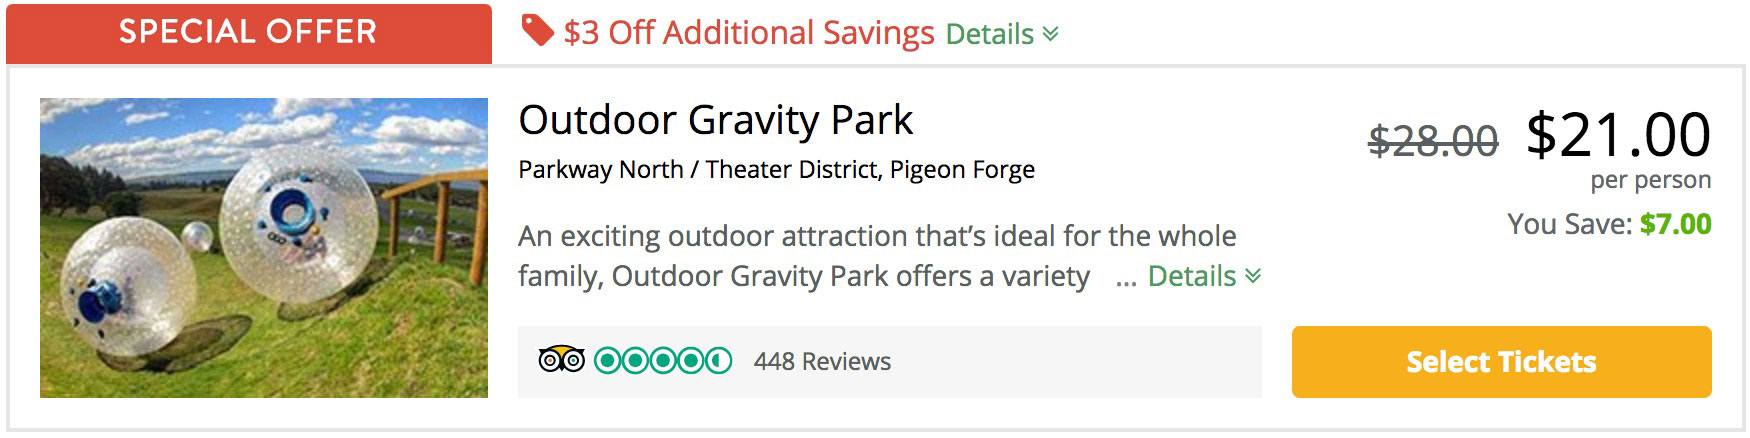 outdoor gravity park coupon